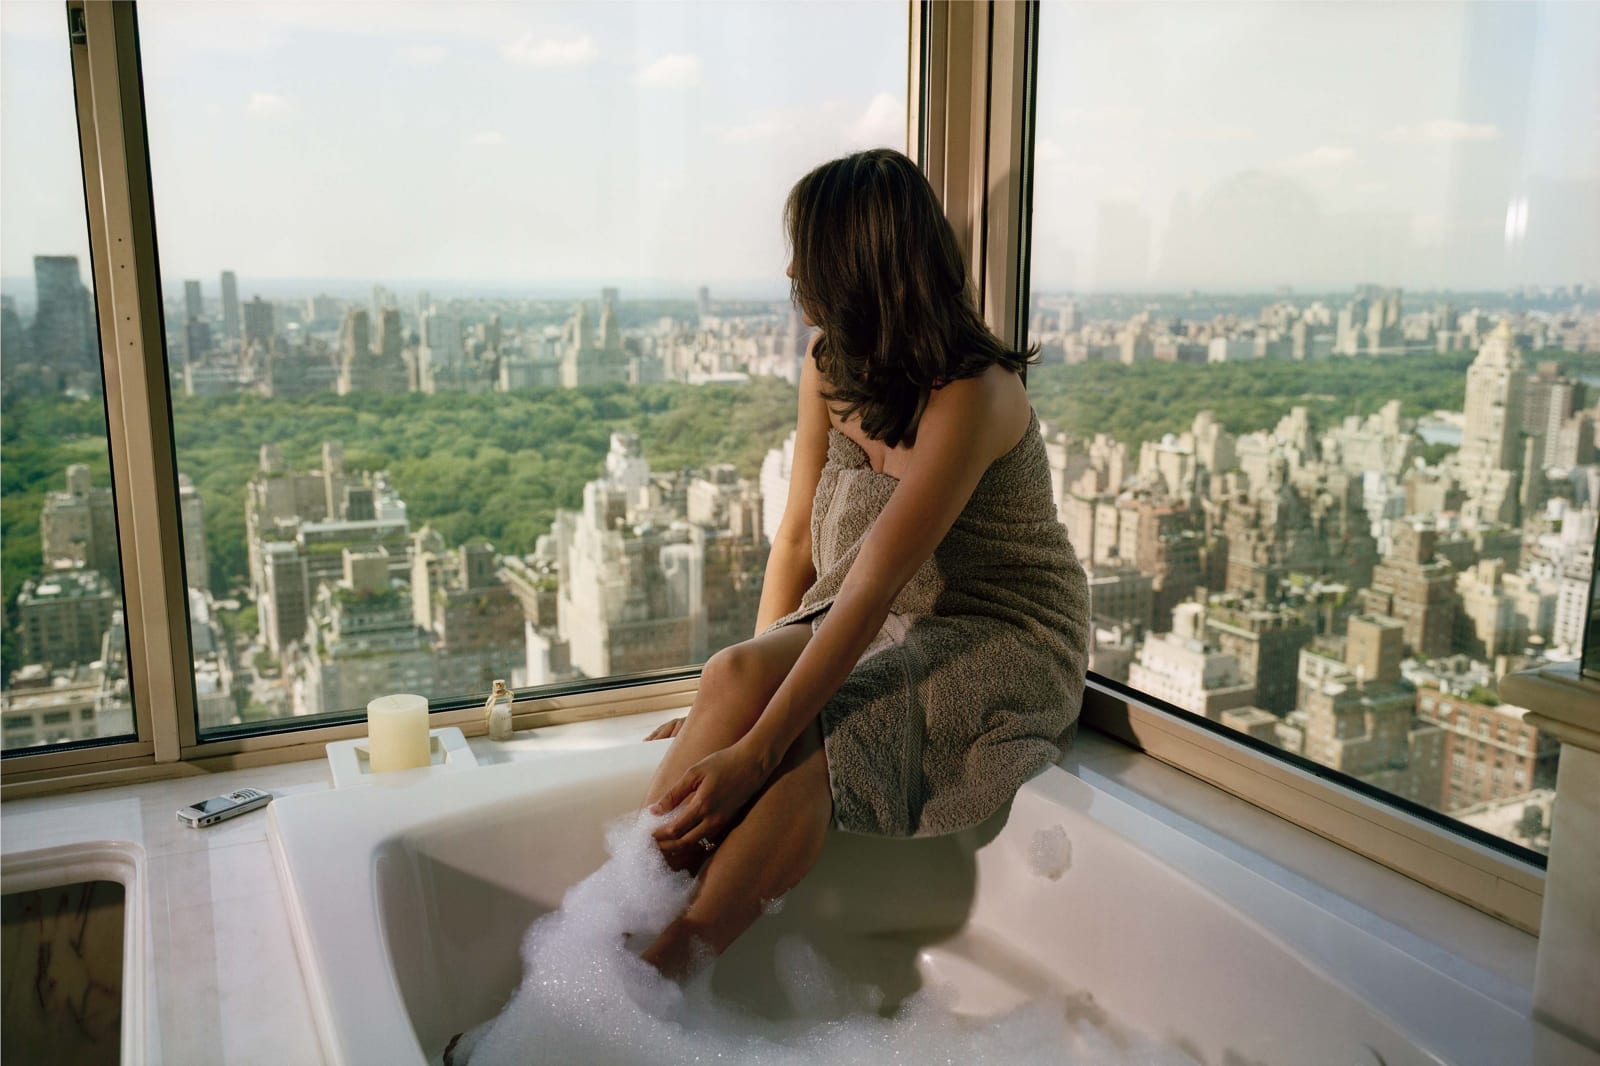 Gail Albert Halaban Out My Window New York Out My Window, Upper East Side, Bubbles, 2007 brunette woman in towel in bubble bath looking out corner window at Central Park and skyline